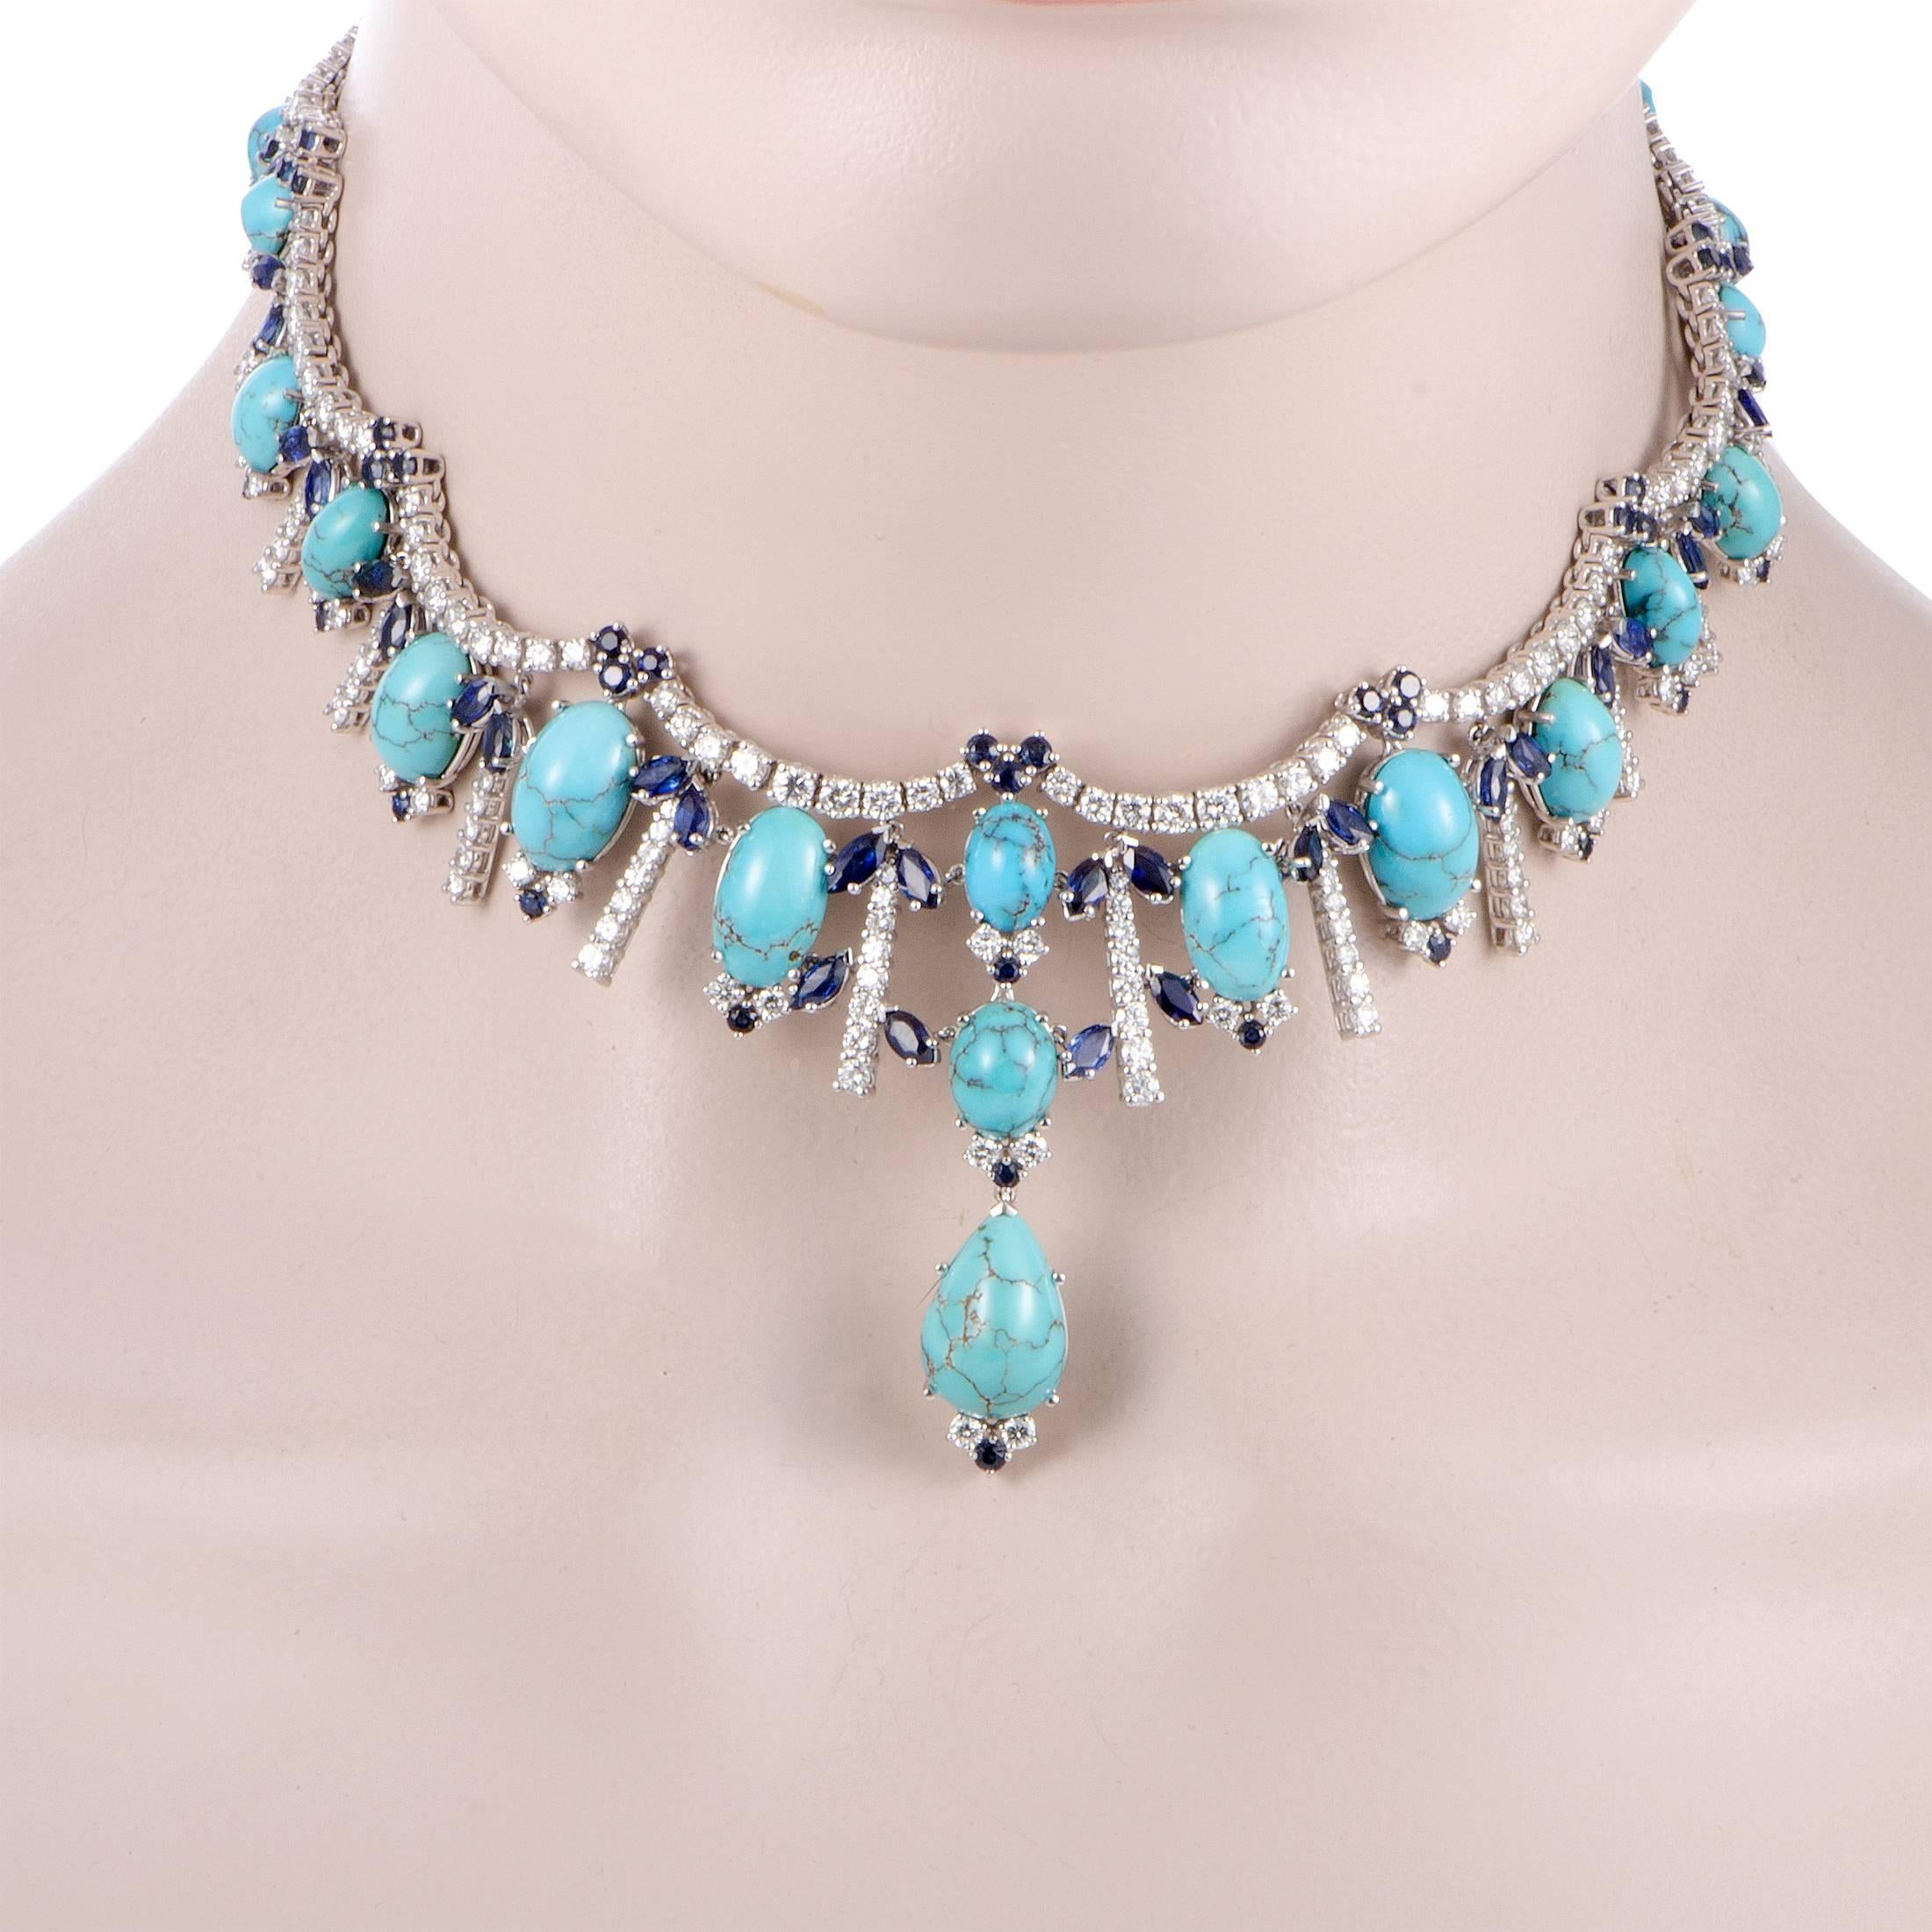 A true representative of what a statement piece looks like, this ravishing necklace is beautifully made of luxurious 18K white gold and extravagantly decorated with a plethora of sapphire, turquoise, and diamond stones. The diamonds amount to 9.86